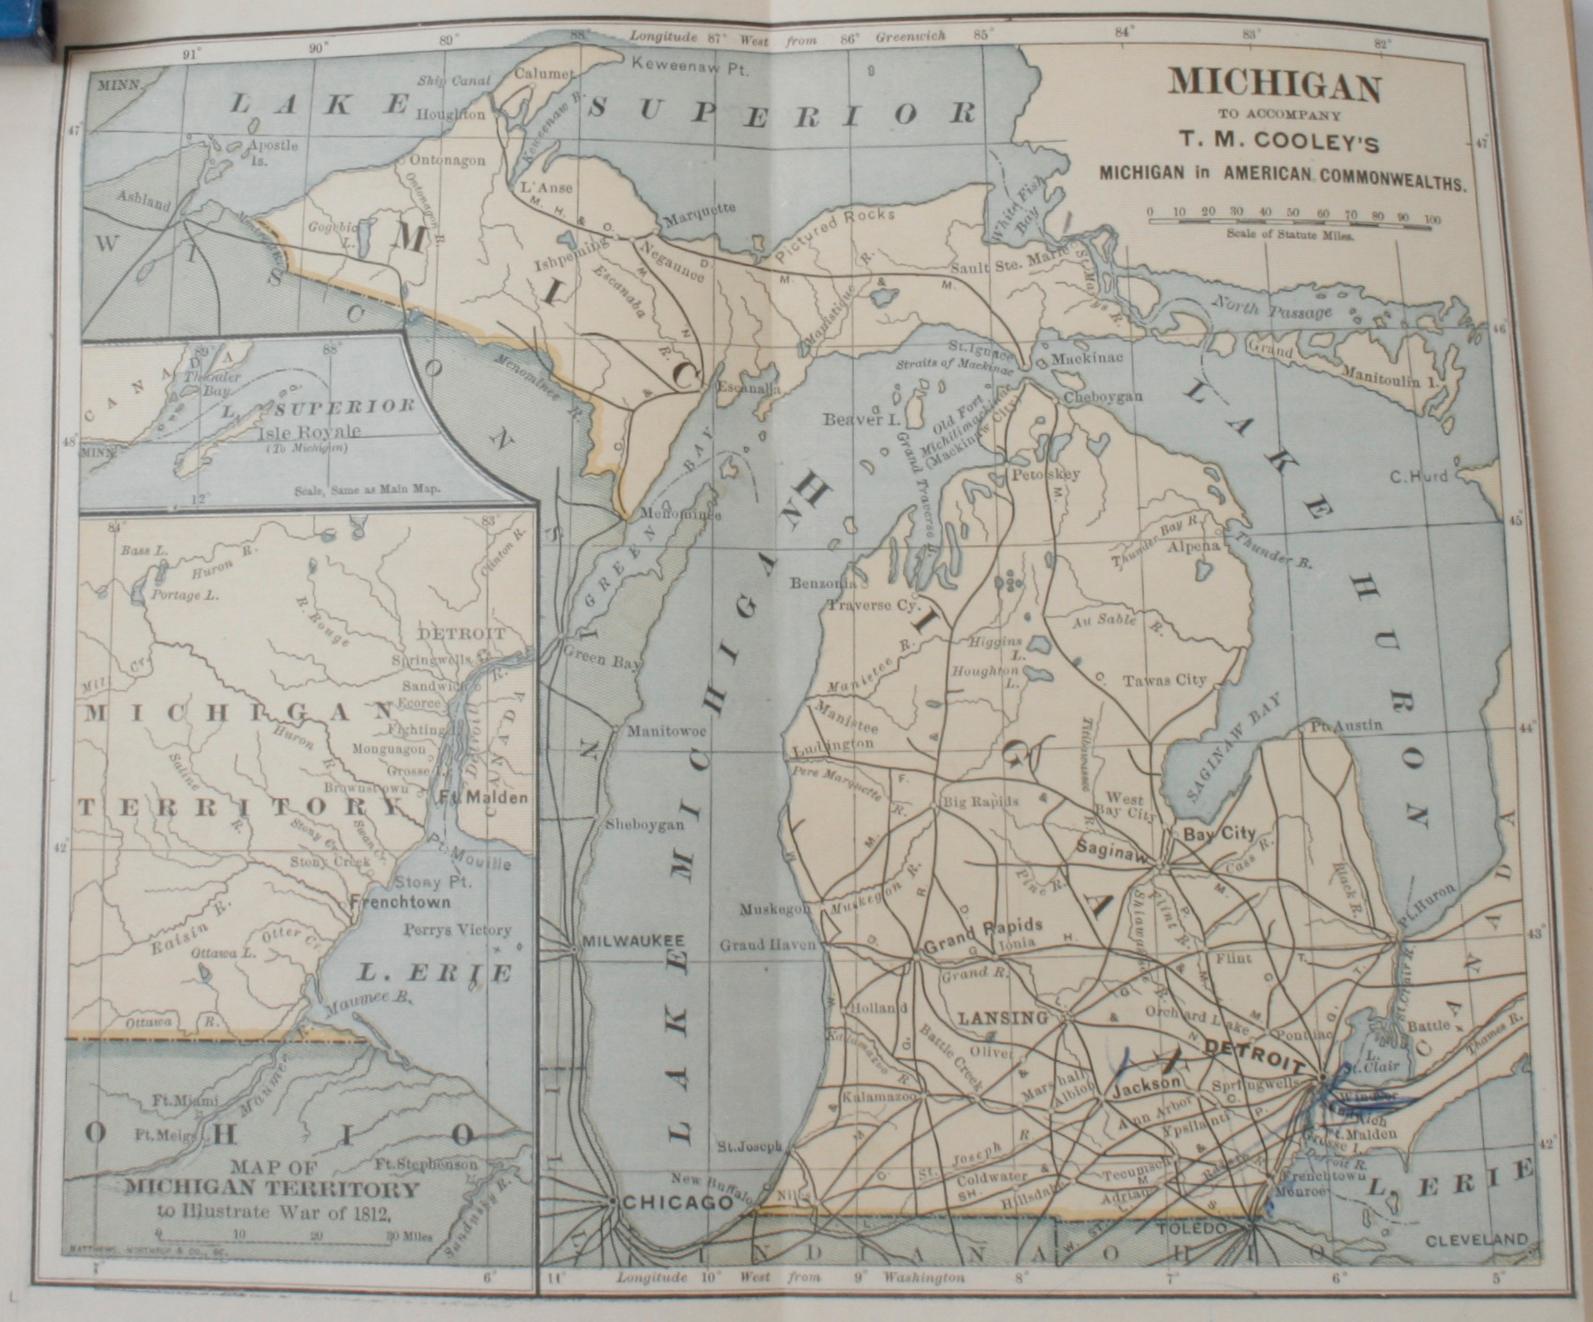 Michigan, a History of Governments by Thomas McIntyre Cooley. Boston: Houghton, Mifflin and Company, 1892. Moroccan and marbleized paper bound hardcover. 376 pp. An antique history book on the state of Michigan, one in a series on American